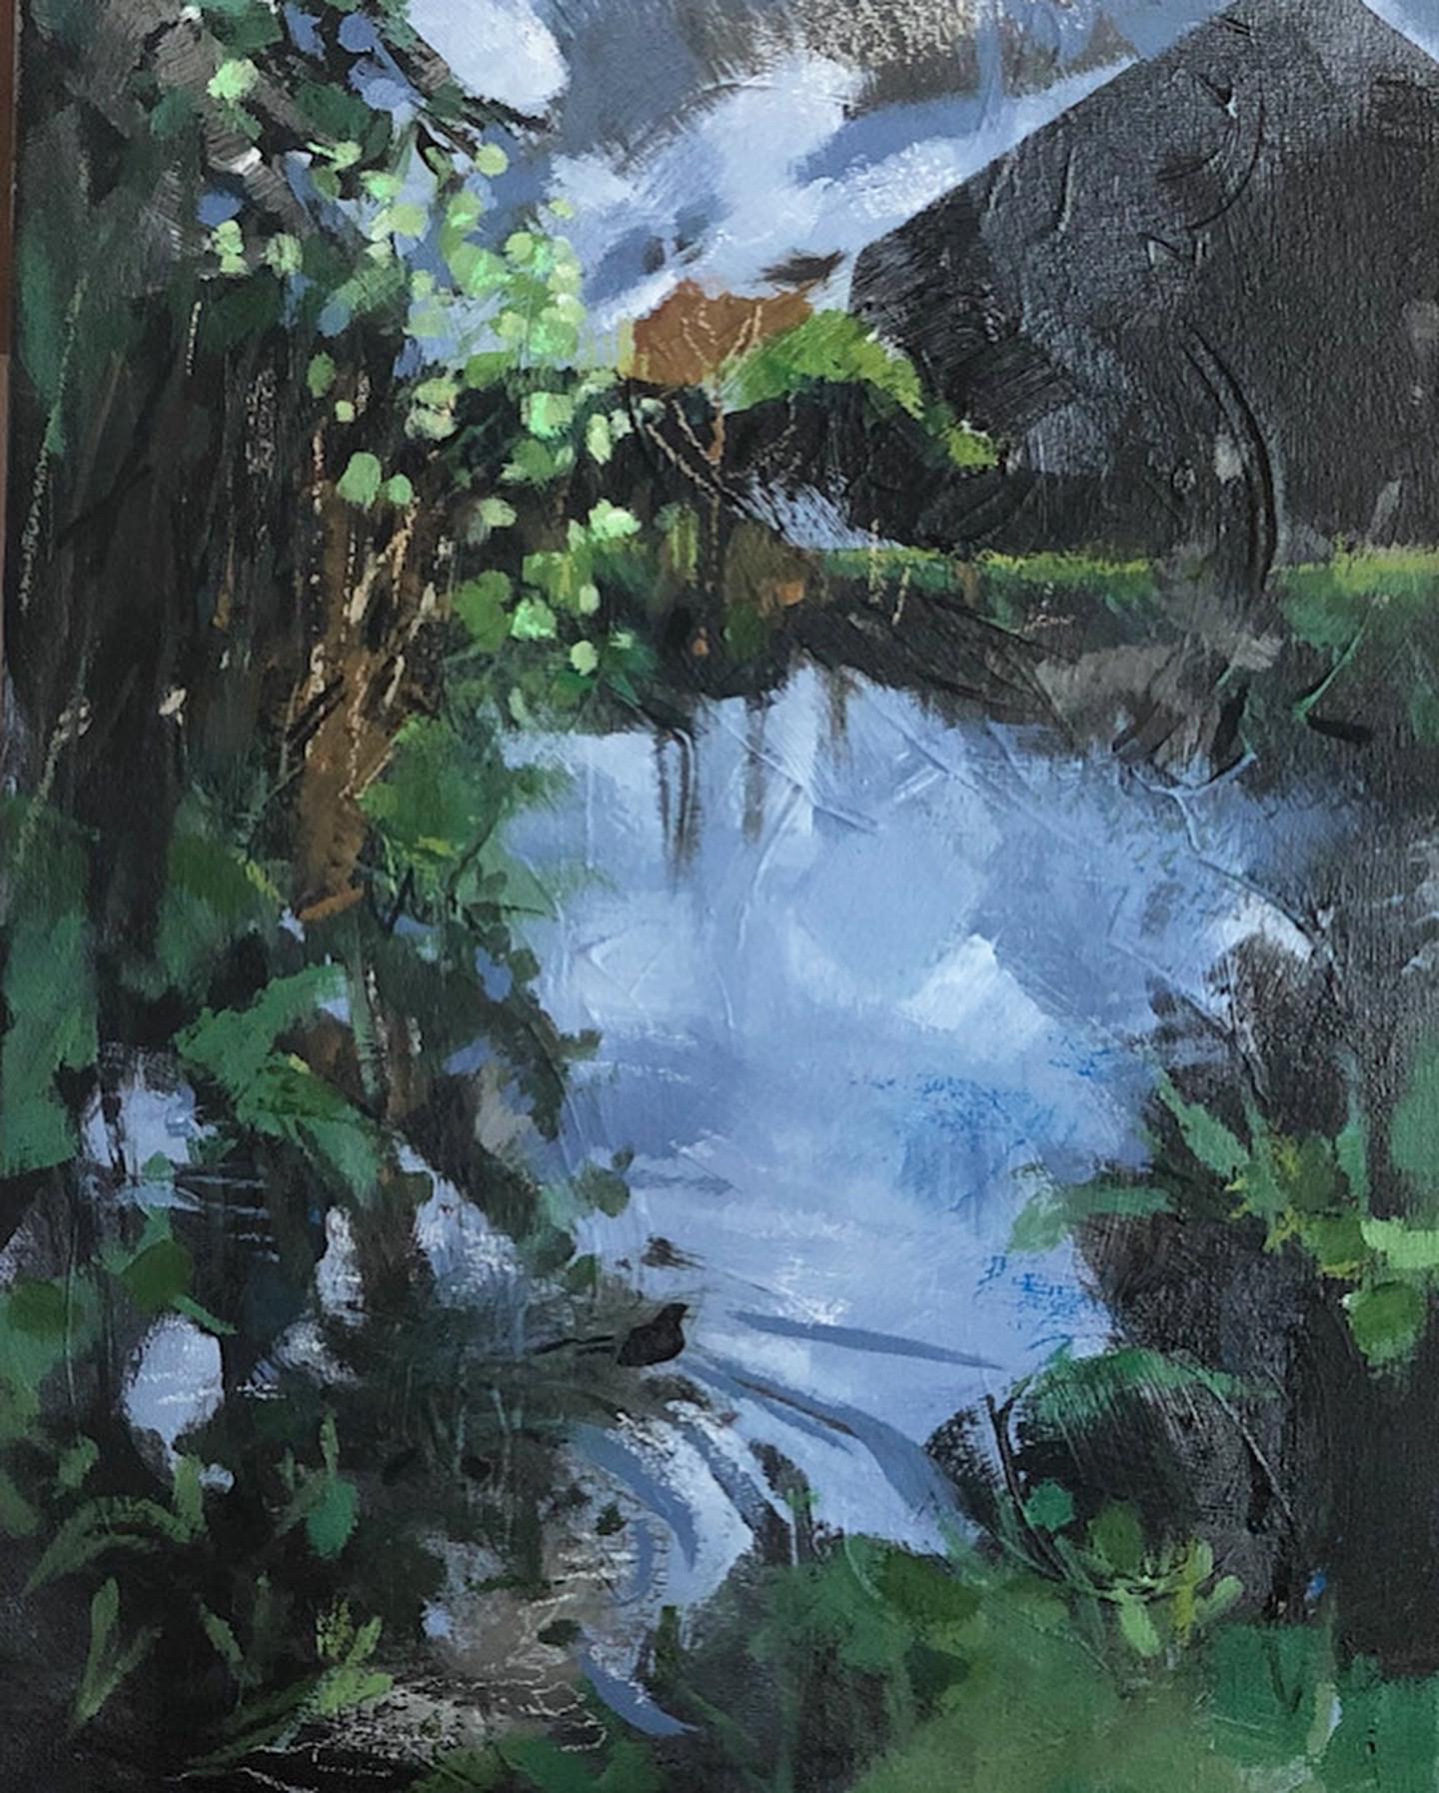 An abstract acrylic painting of a pond surrounded by trees and vegetation, a small black moorhen swims in the foreground.